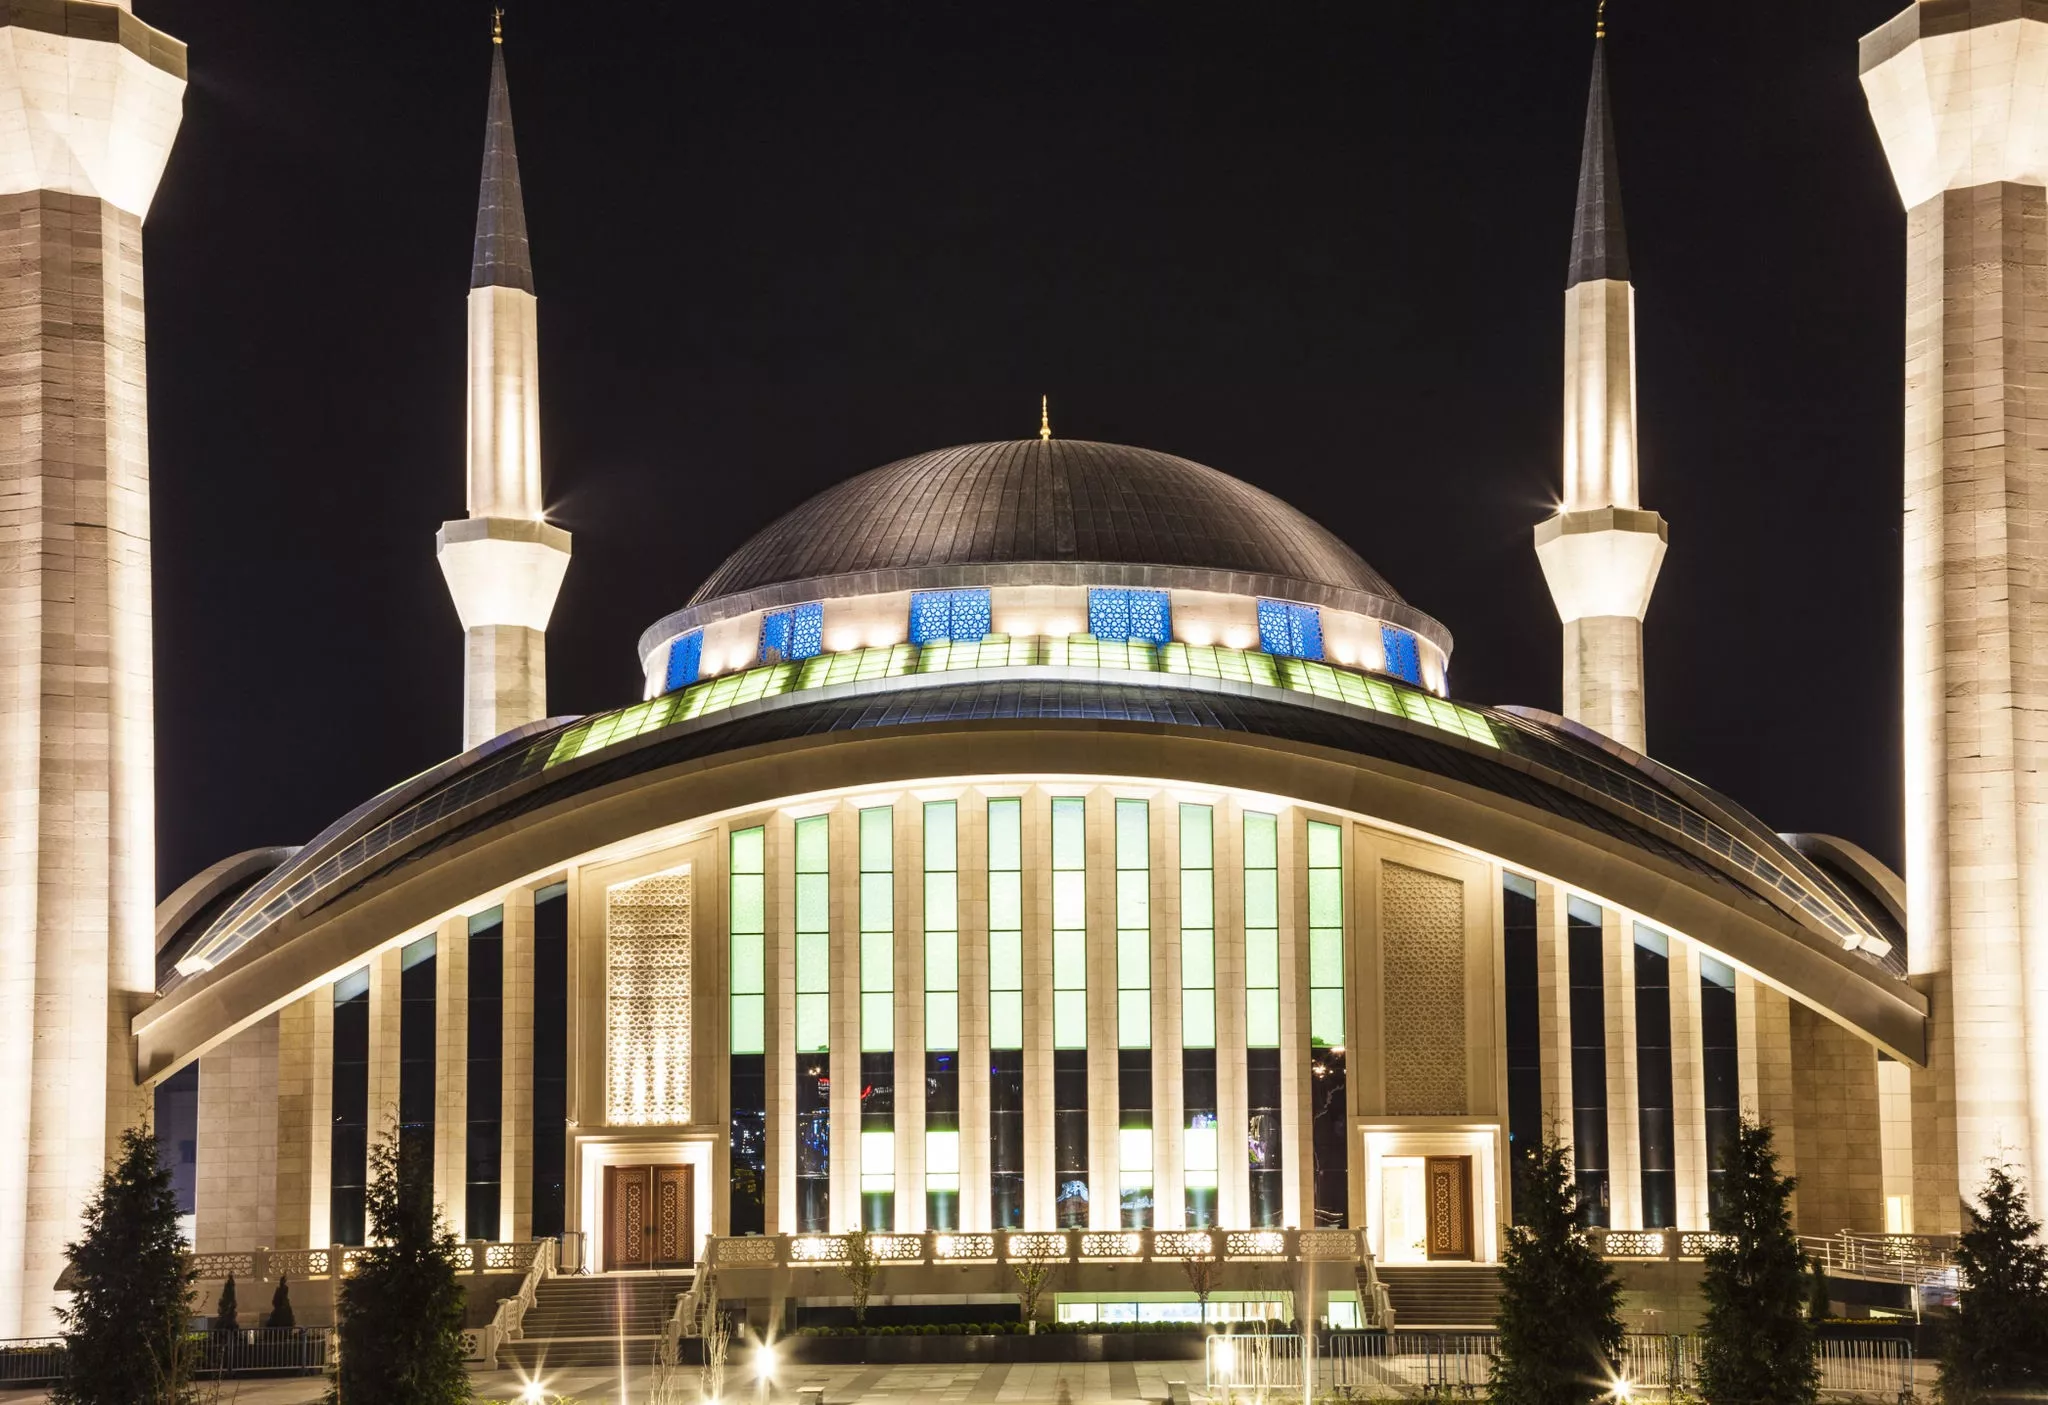 Ahmet Hamdi Akseki Mosque in Turkey, Central Asia | Architecture - Rated 3.9